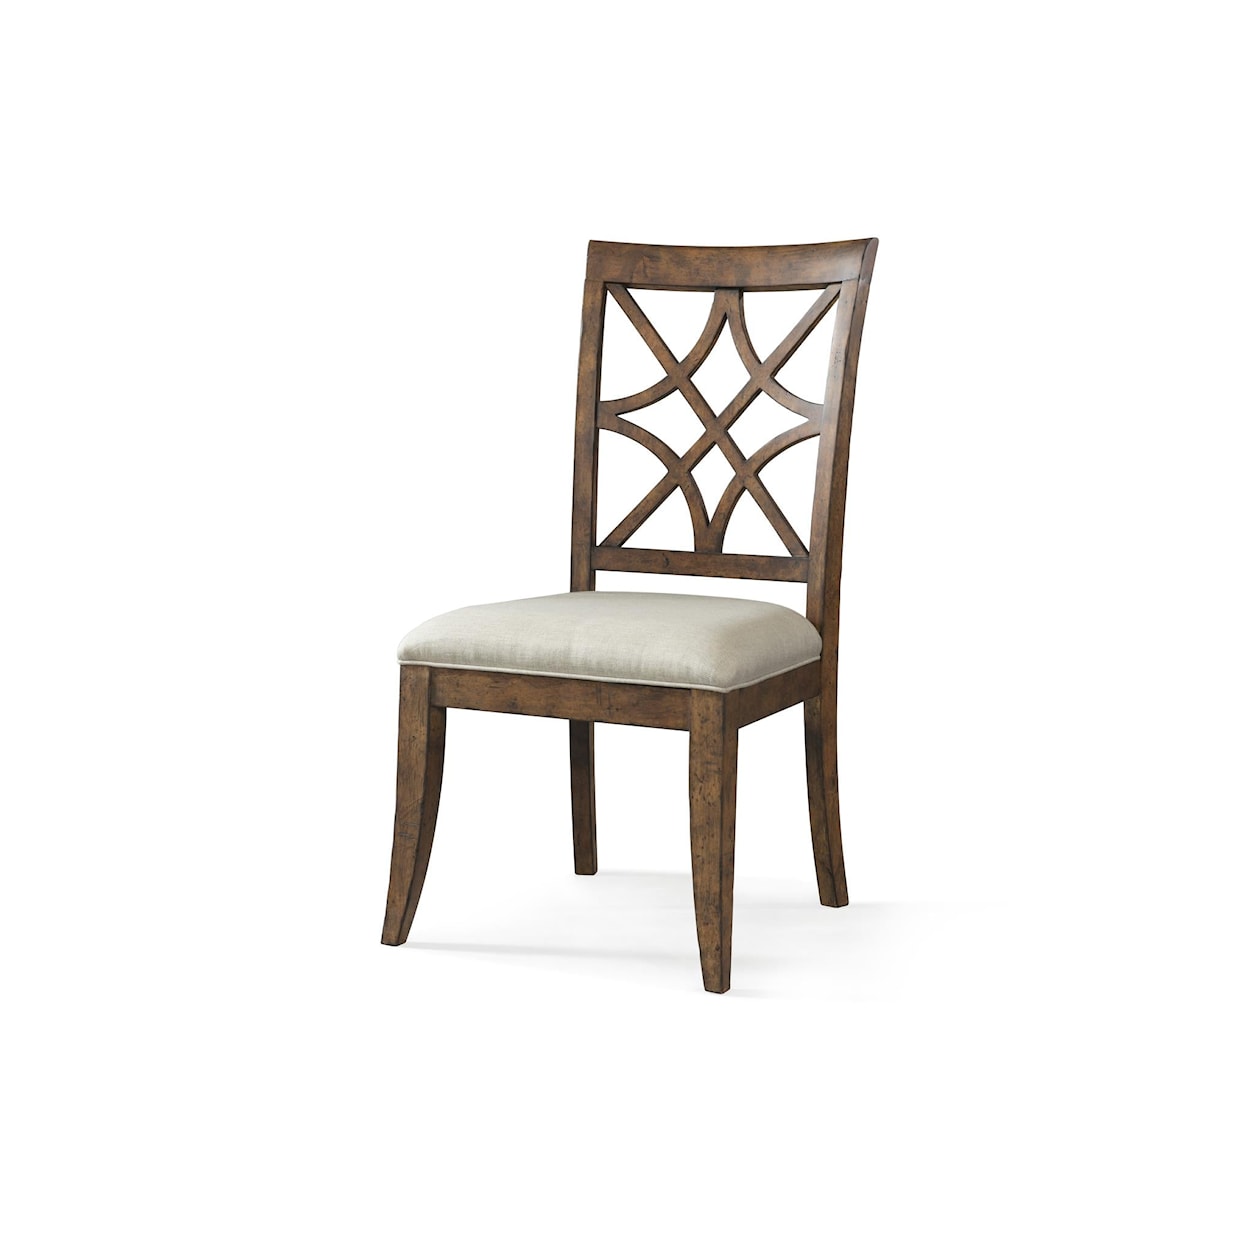 Trisha Yearwood Home Collection by Legacy Classic Trisha Yearwood Home Nashville Side Chair